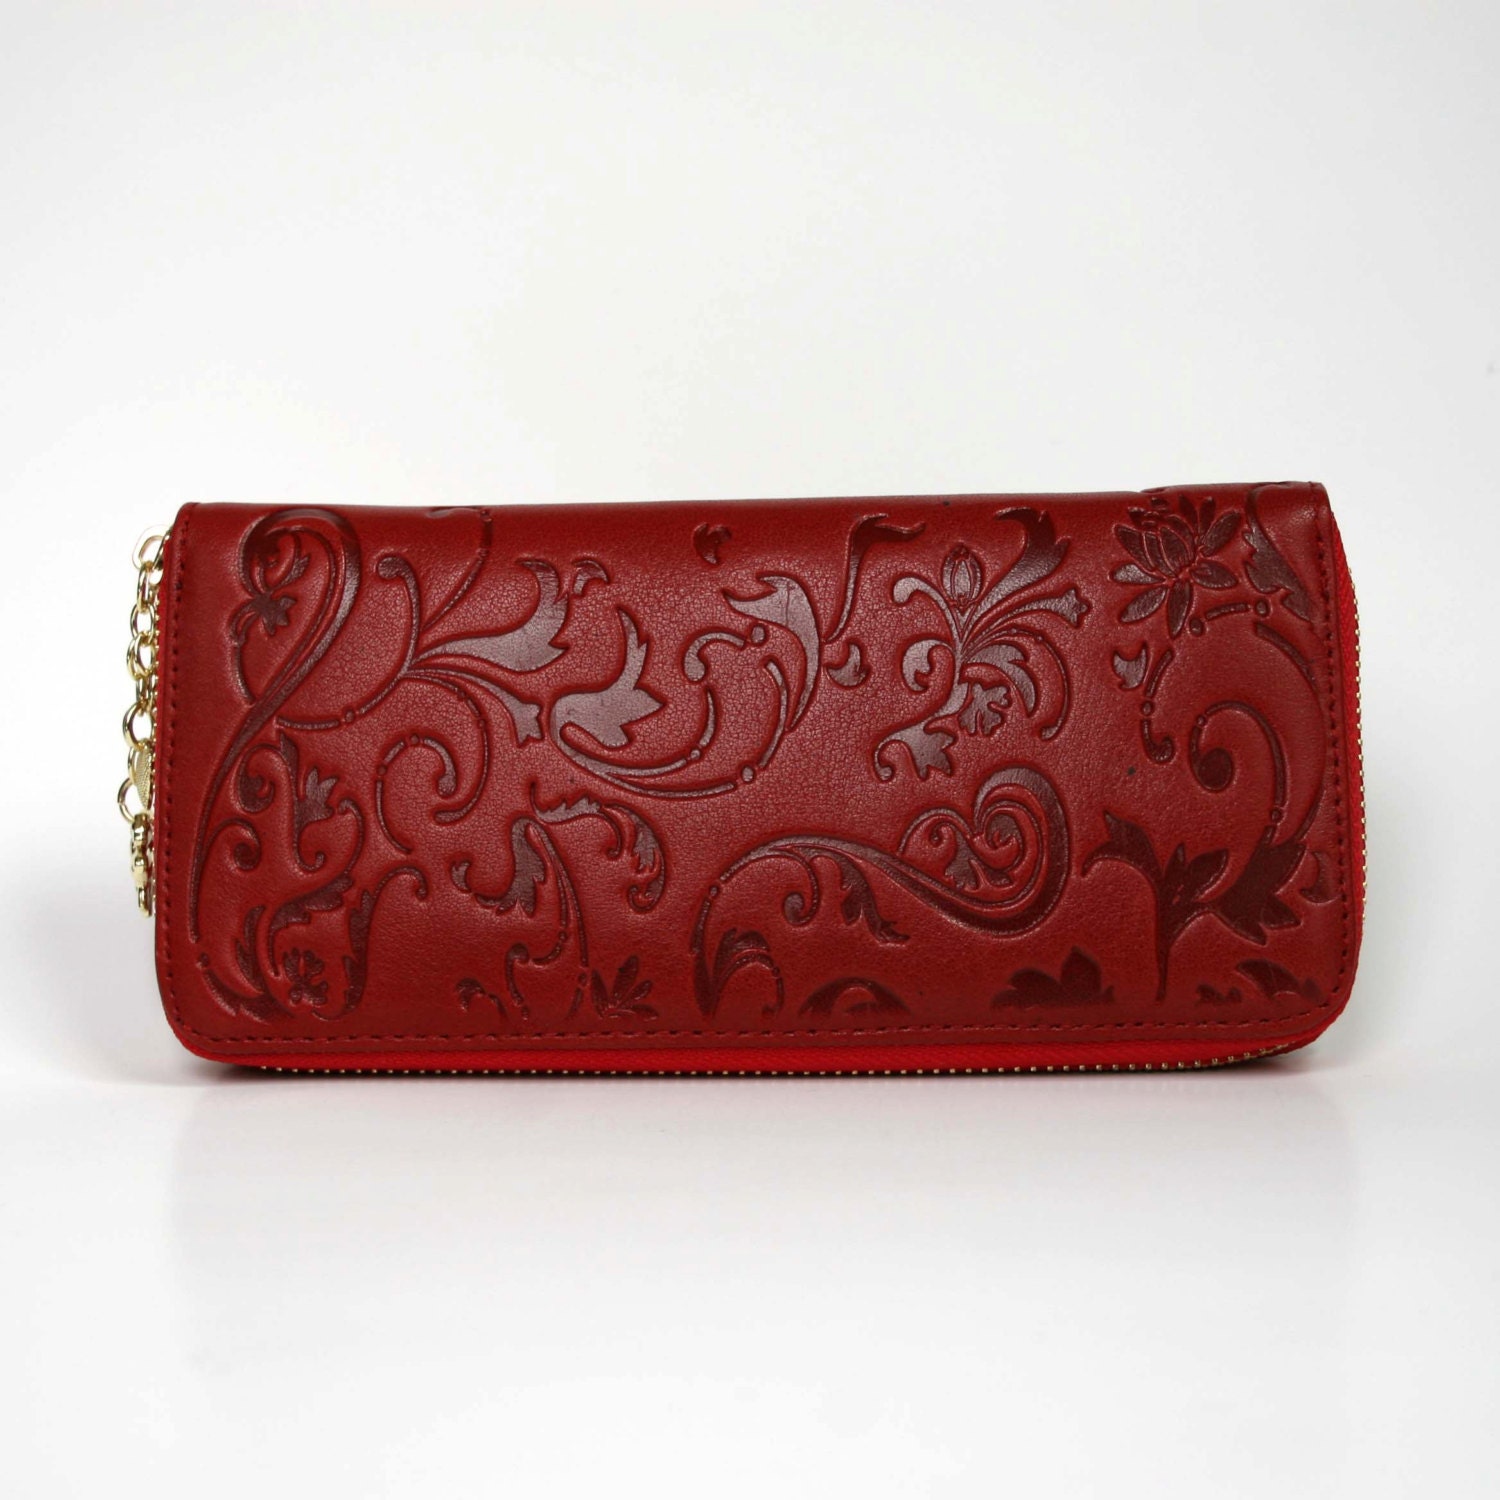 Floral Leather Wallet Red Leather Wallet Floral by kayameiershop